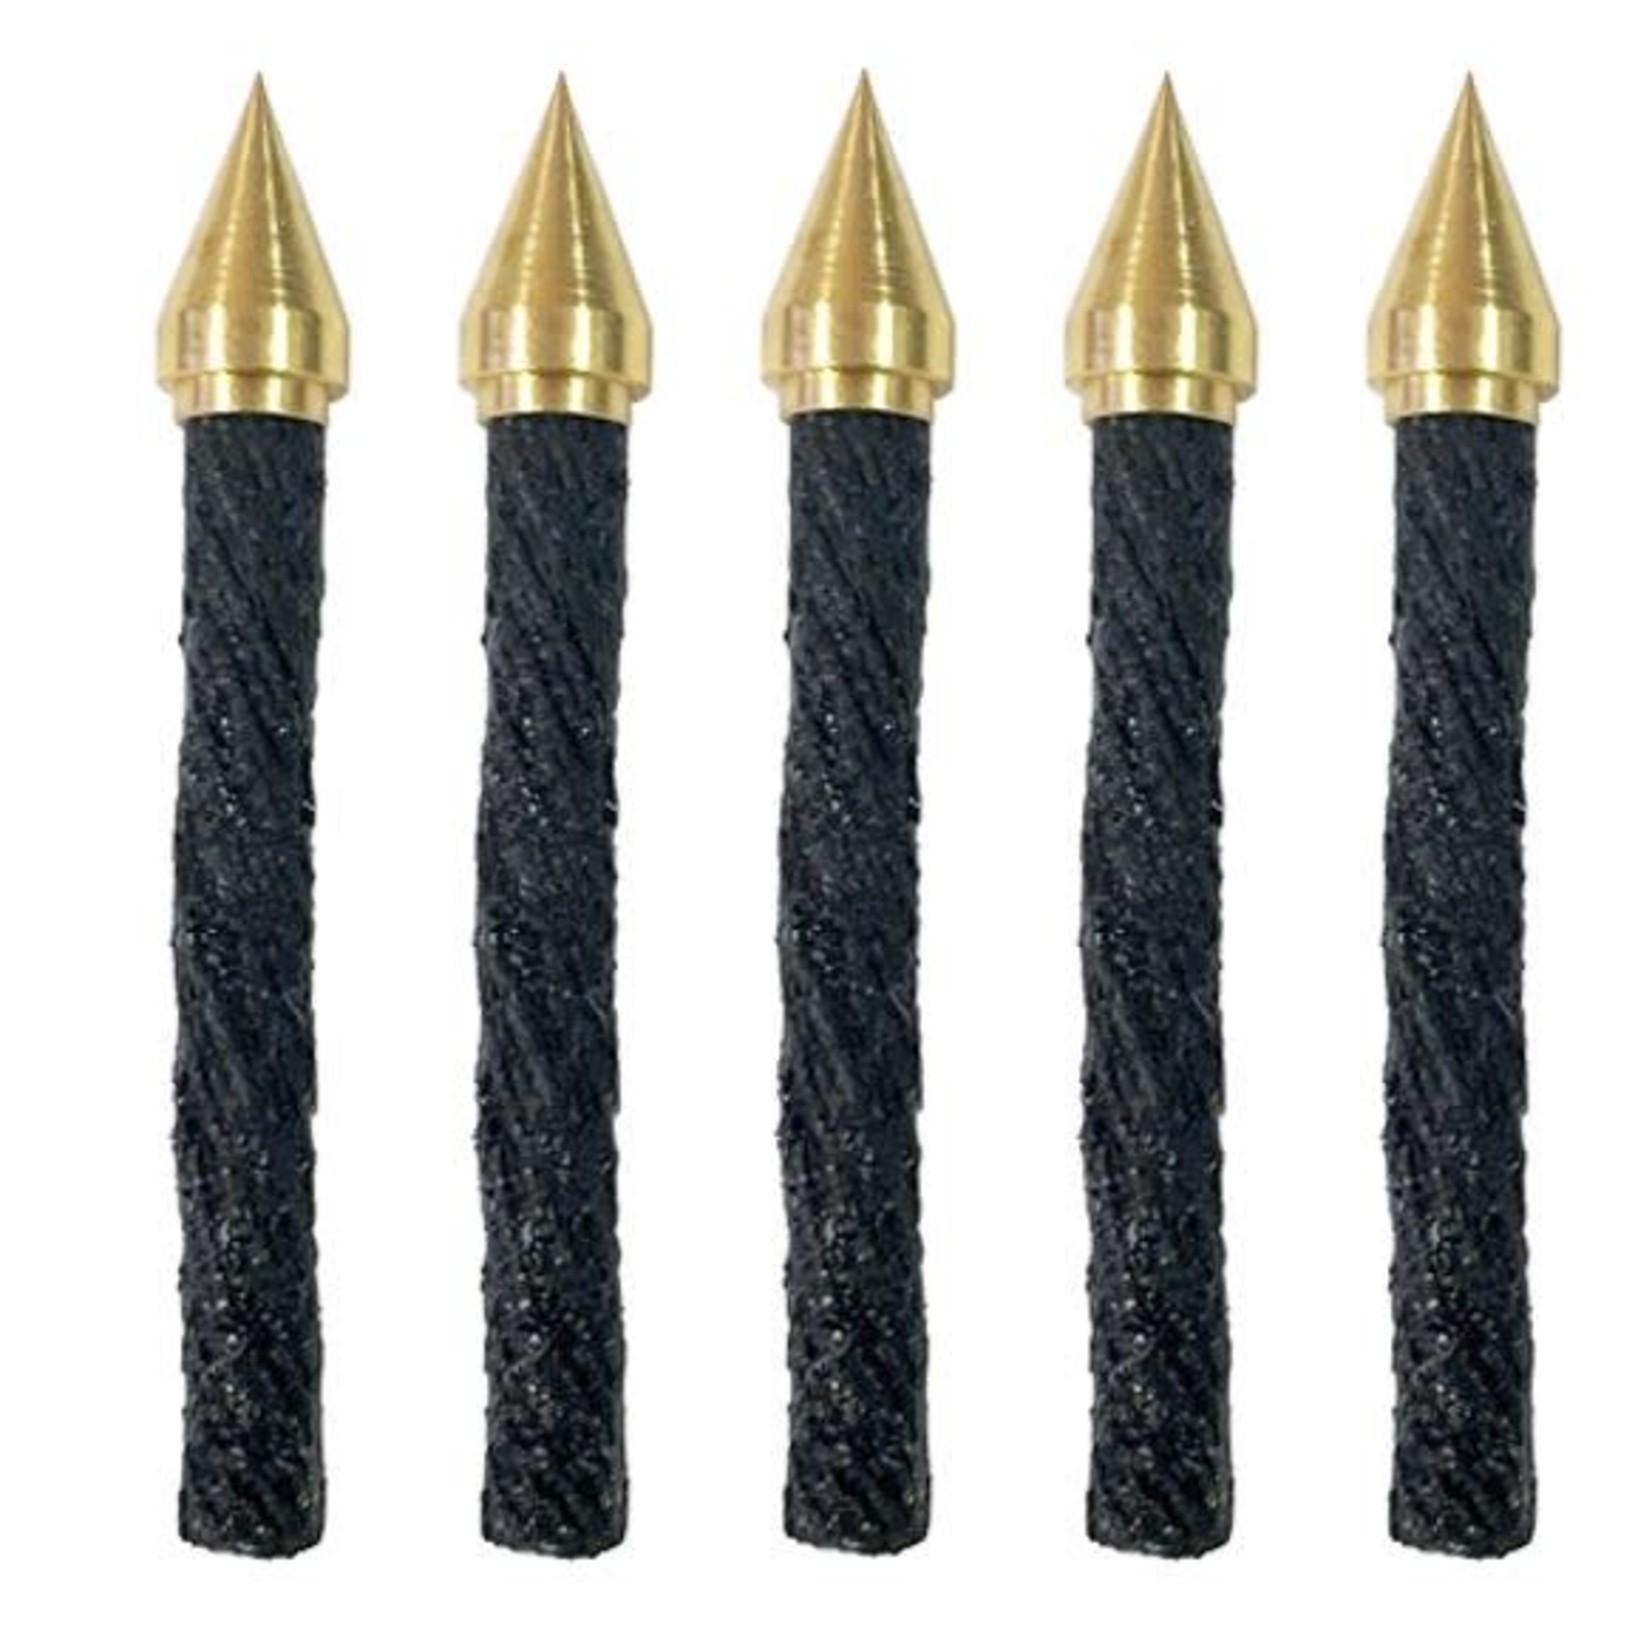 Dynaplug Dynaplug Replacement Tubeless Tire Repair Plugs - Sharp Point - 5 Pack